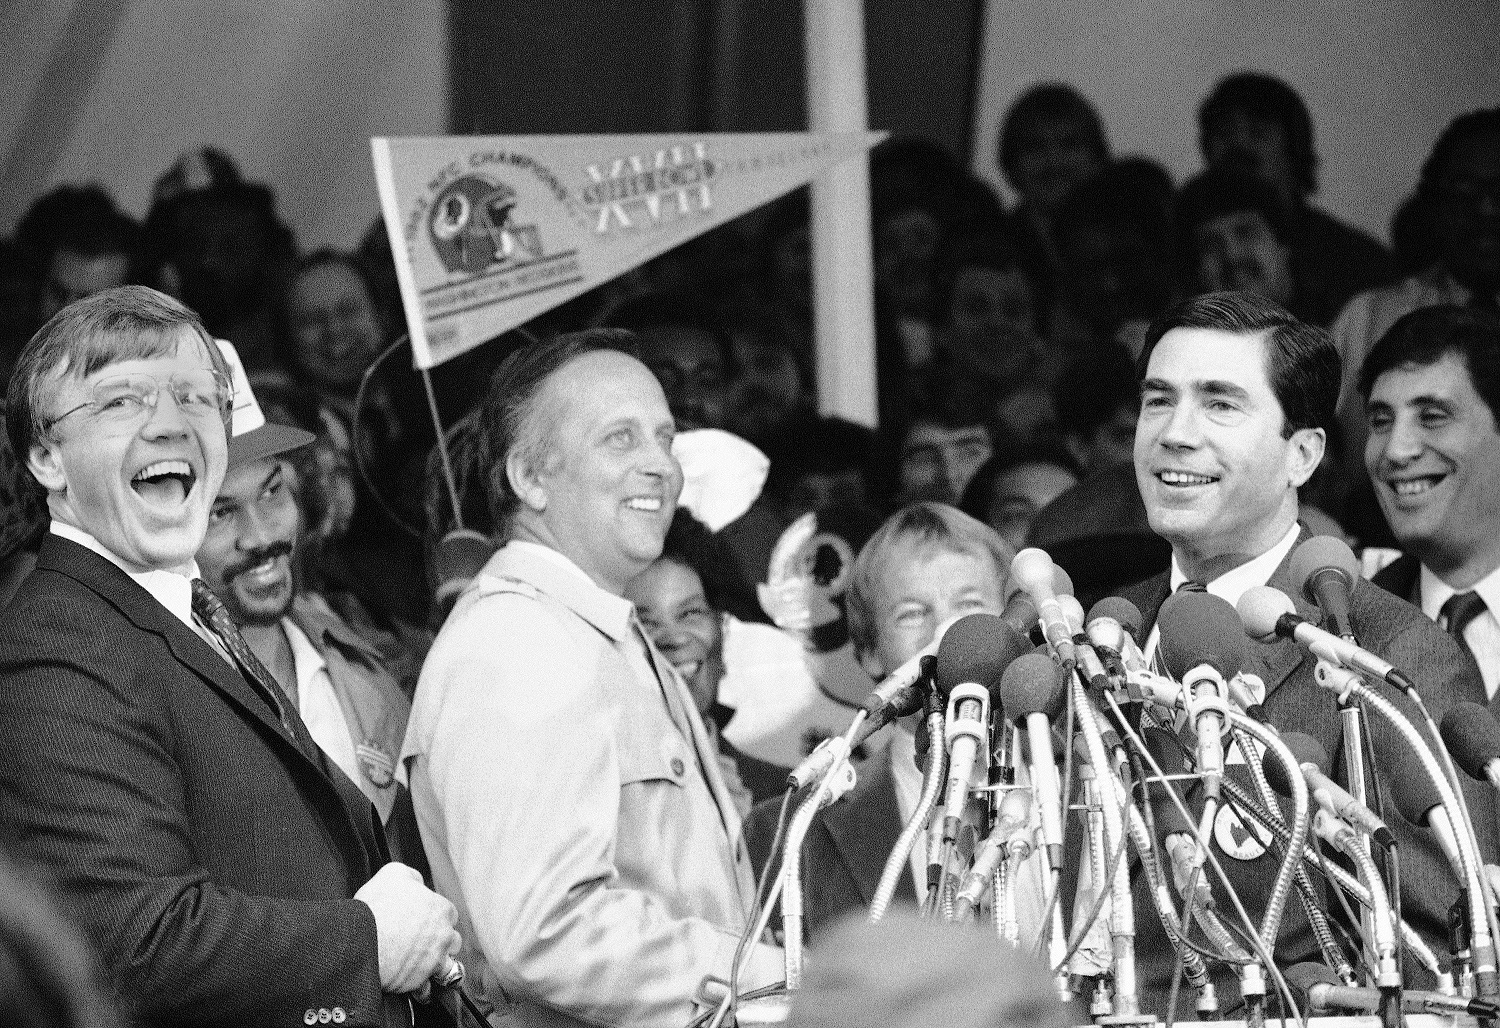 Washington Redskins Head Coach Joe Gibbs, left, reacts to the reading of a proclamation honoring the Redskins by Virginia Governor Chuck Robb, right, Wednesday, Feb. 2, 1983, Washington, D.C. Behind Gibbs is Redskins Fred Dean and in the center is Frank Herzog, the master of ceremonies. (AP Photo)